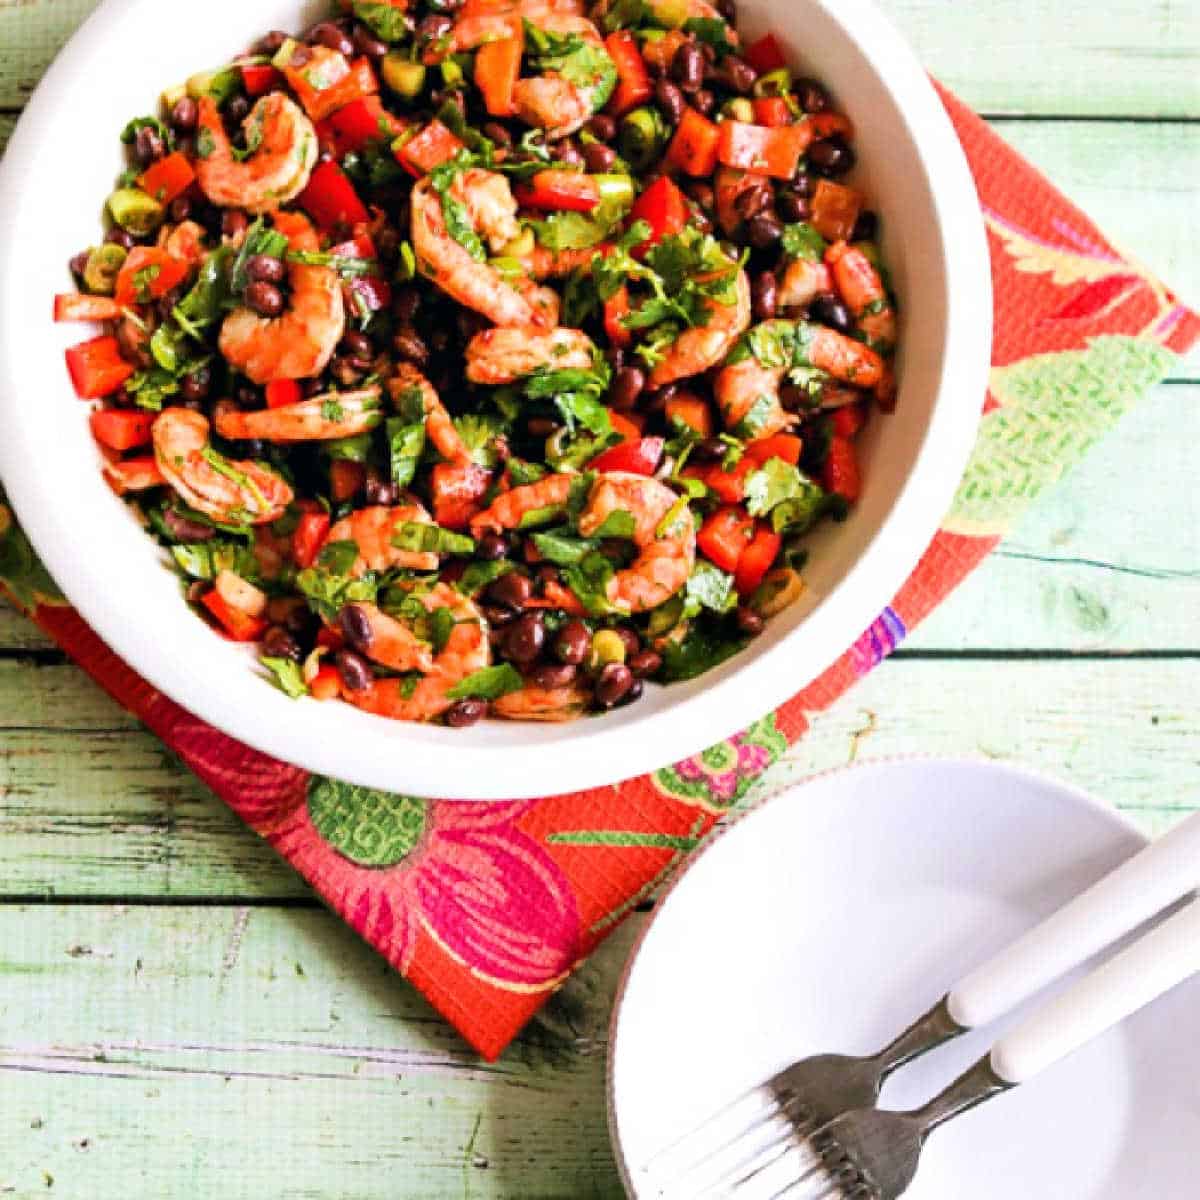 Square image of Shrimp and Black Bean Salad in bowl with plates, forks.